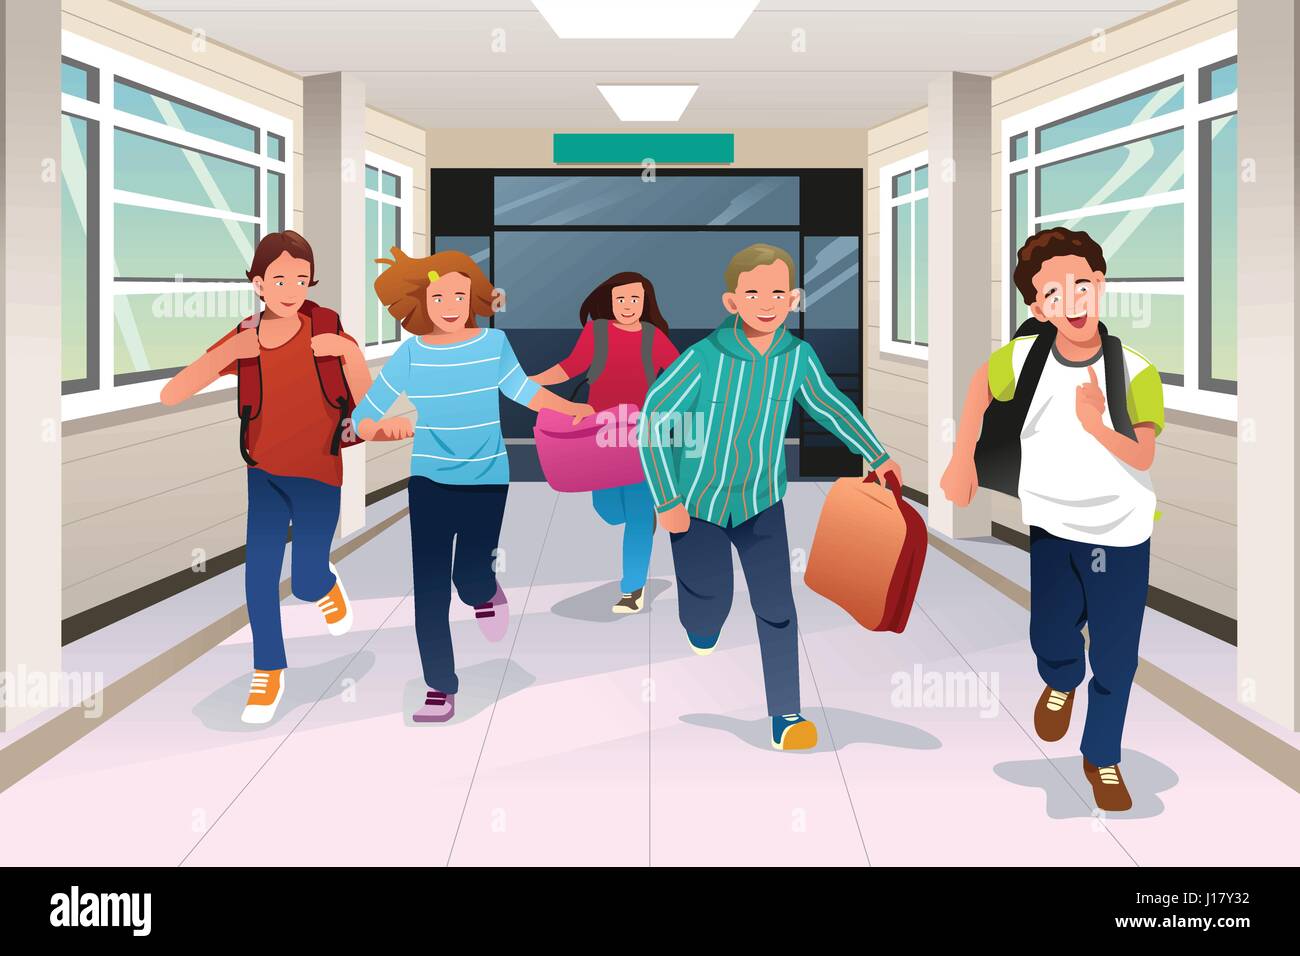 A vector illustration of happy student running in school hallway together Stock Vector